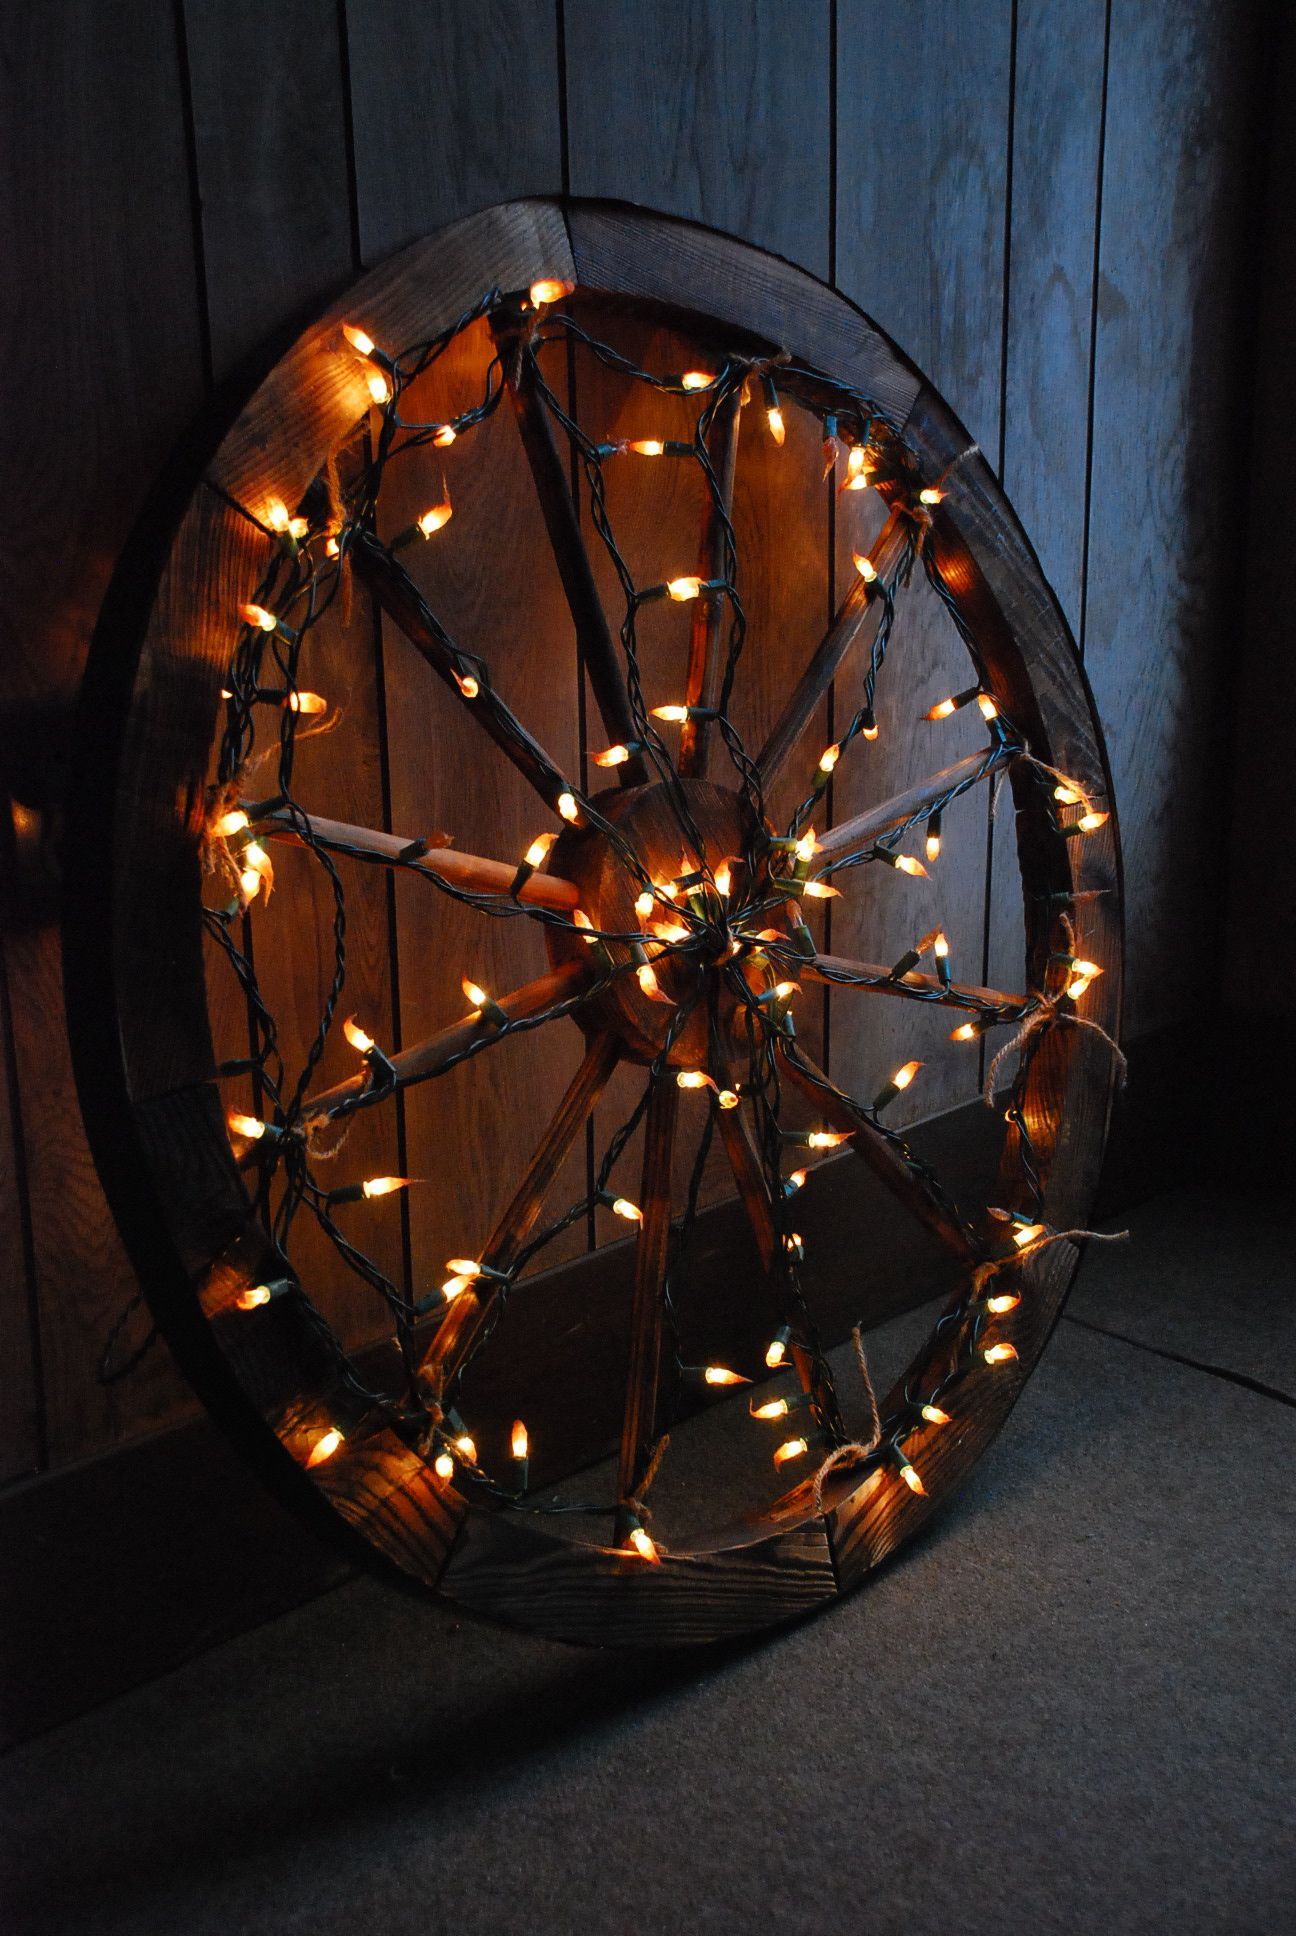 Wagon wheel. If I have a barn wedding, I definitely would like this to be there